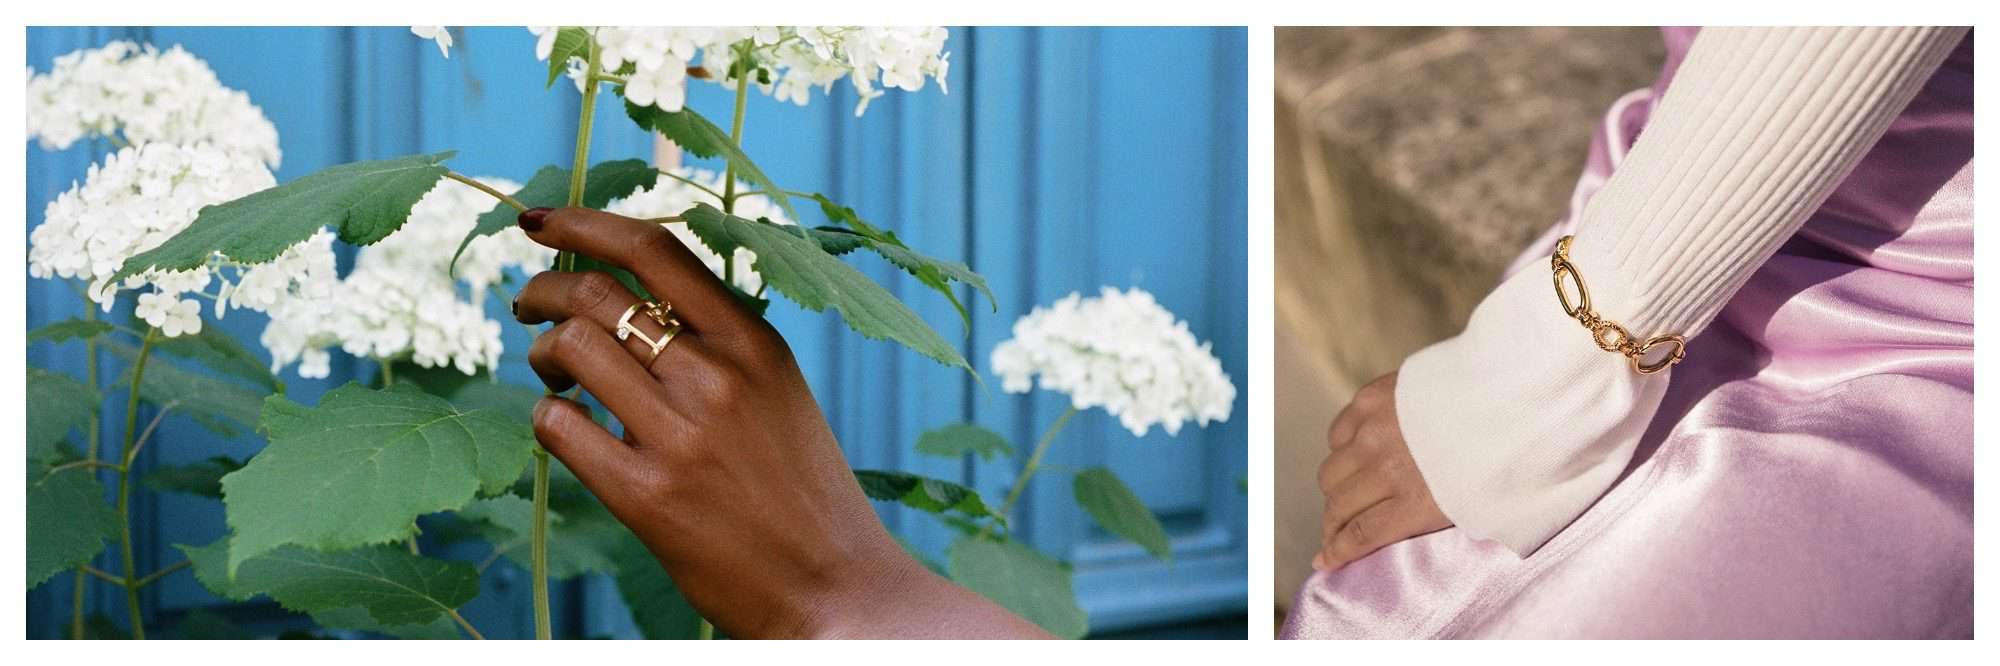 Jewelry by Parisian designer Louise Damas like a ring (left) and a chain bracelet (right).